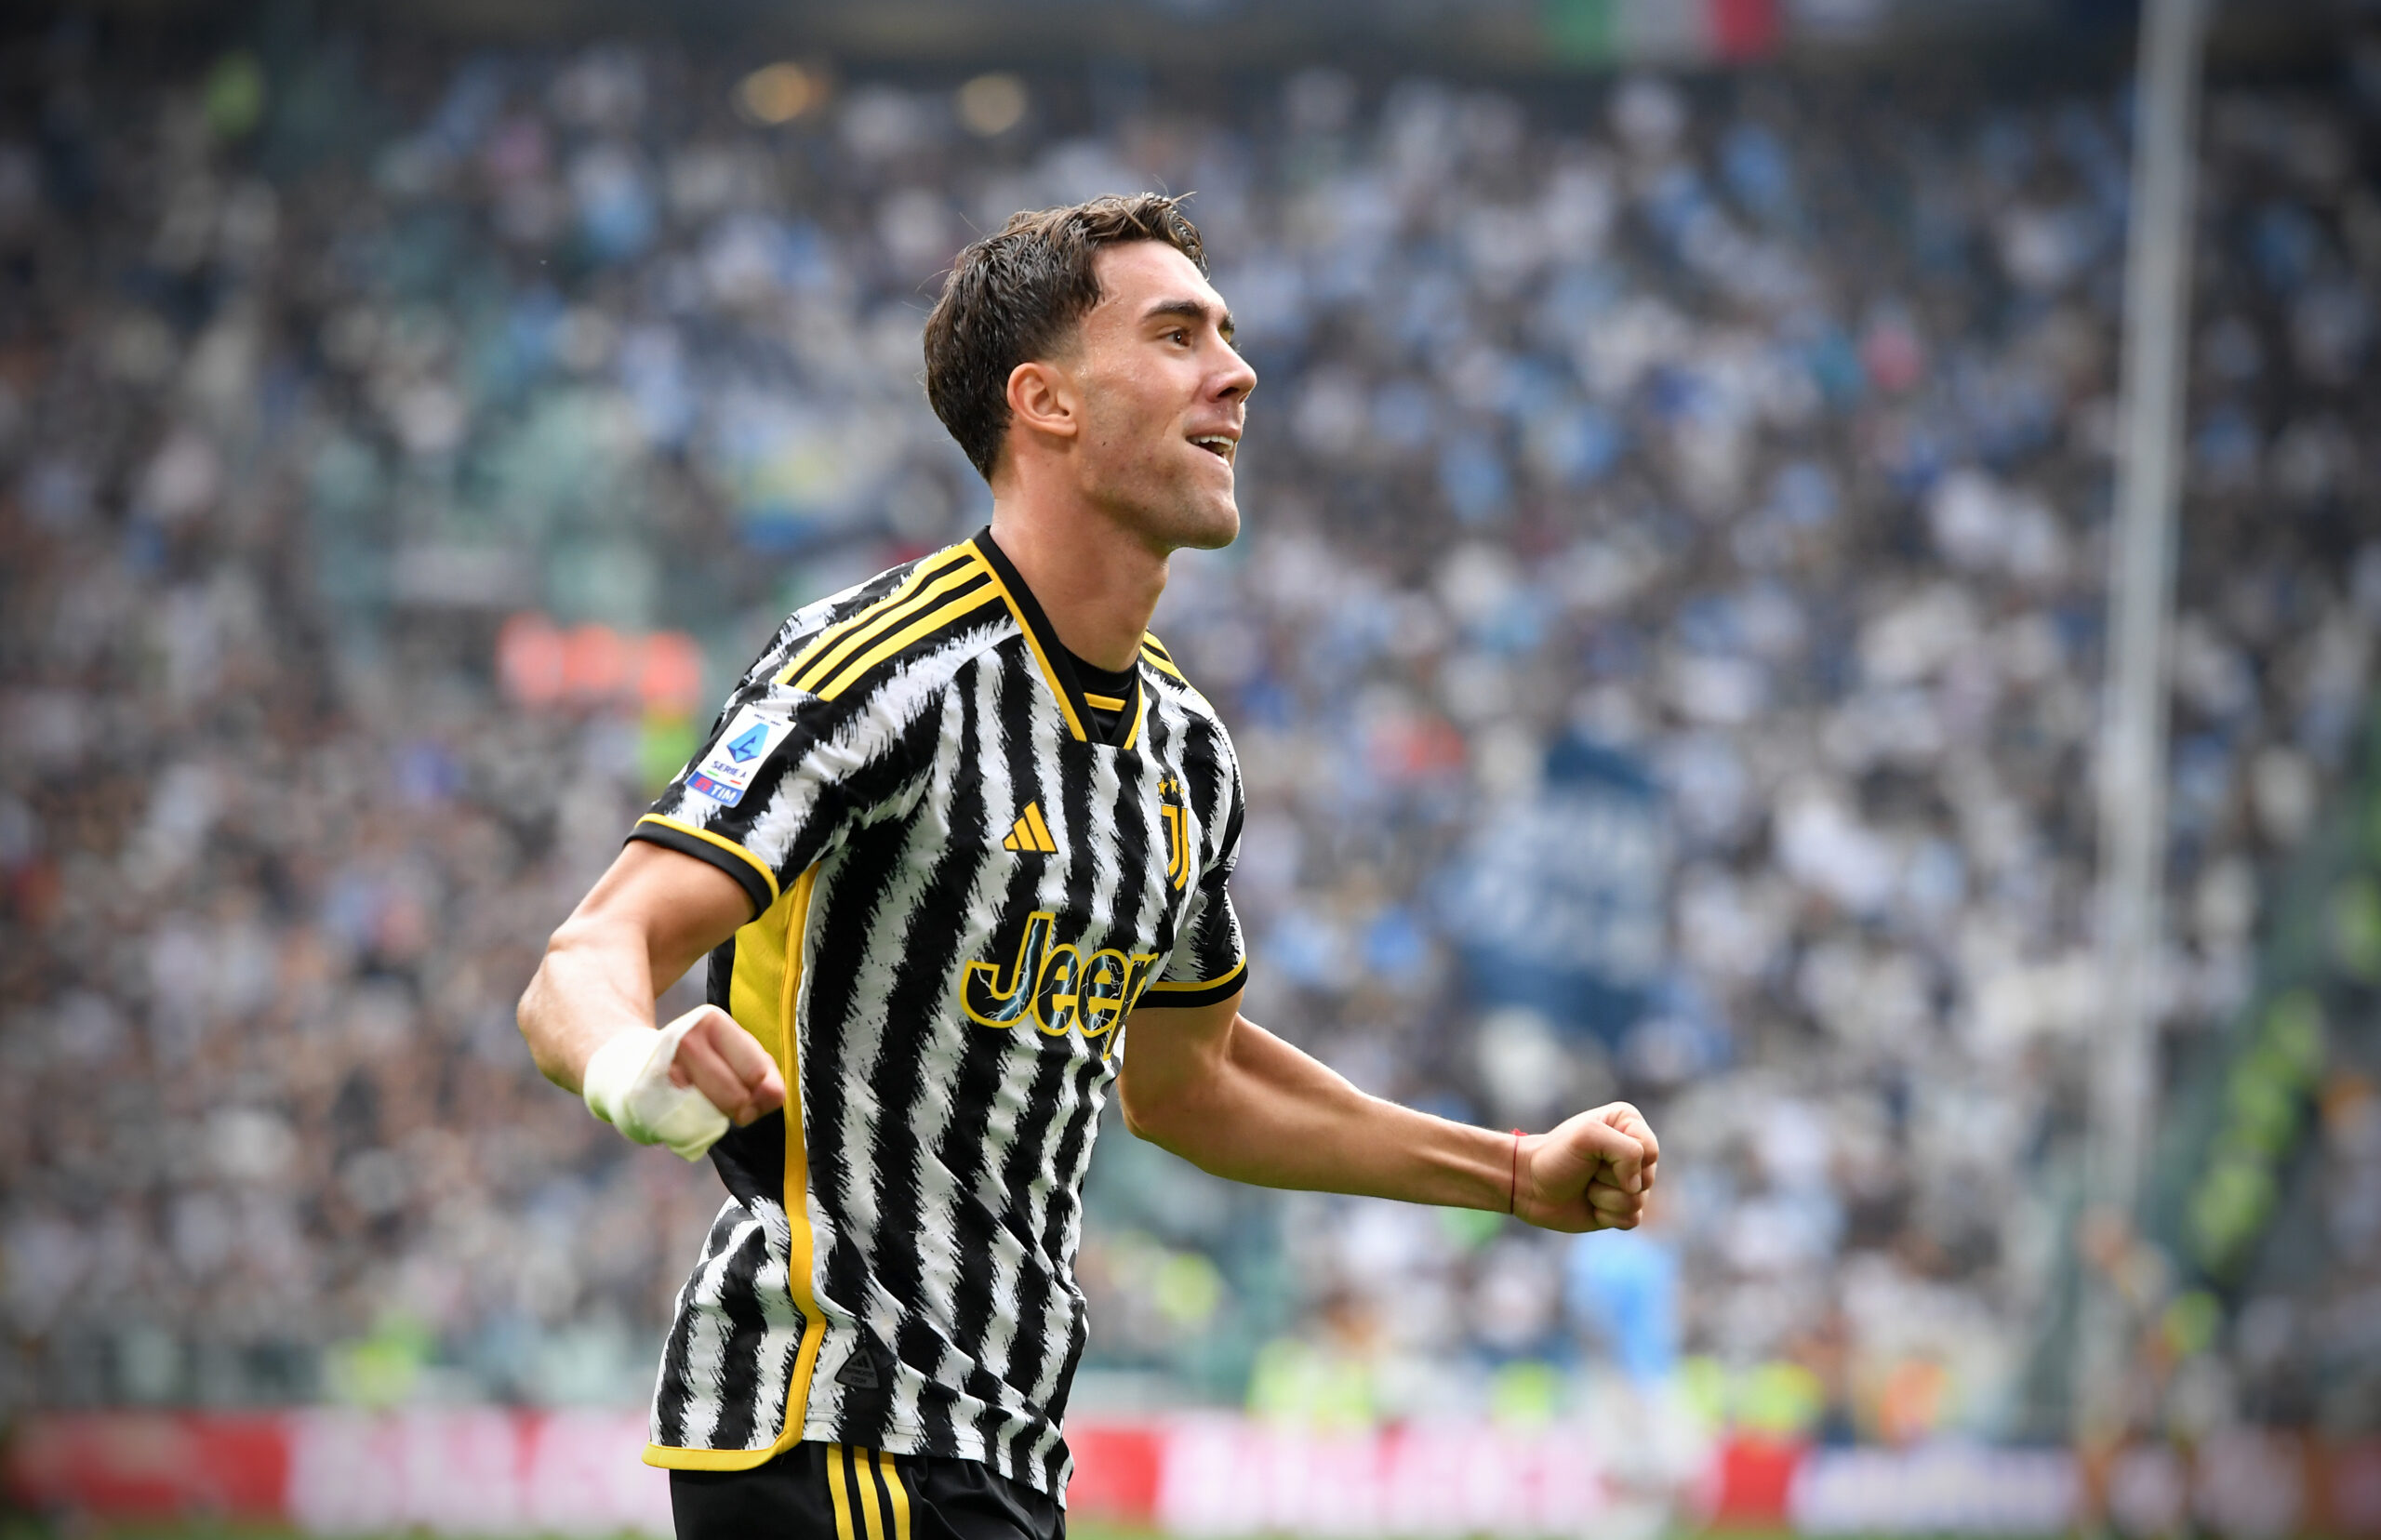 Juventus and Atletico Madrid have crossed paths on the transfer market multiple times in recent windows, although not many deals got done in the end.